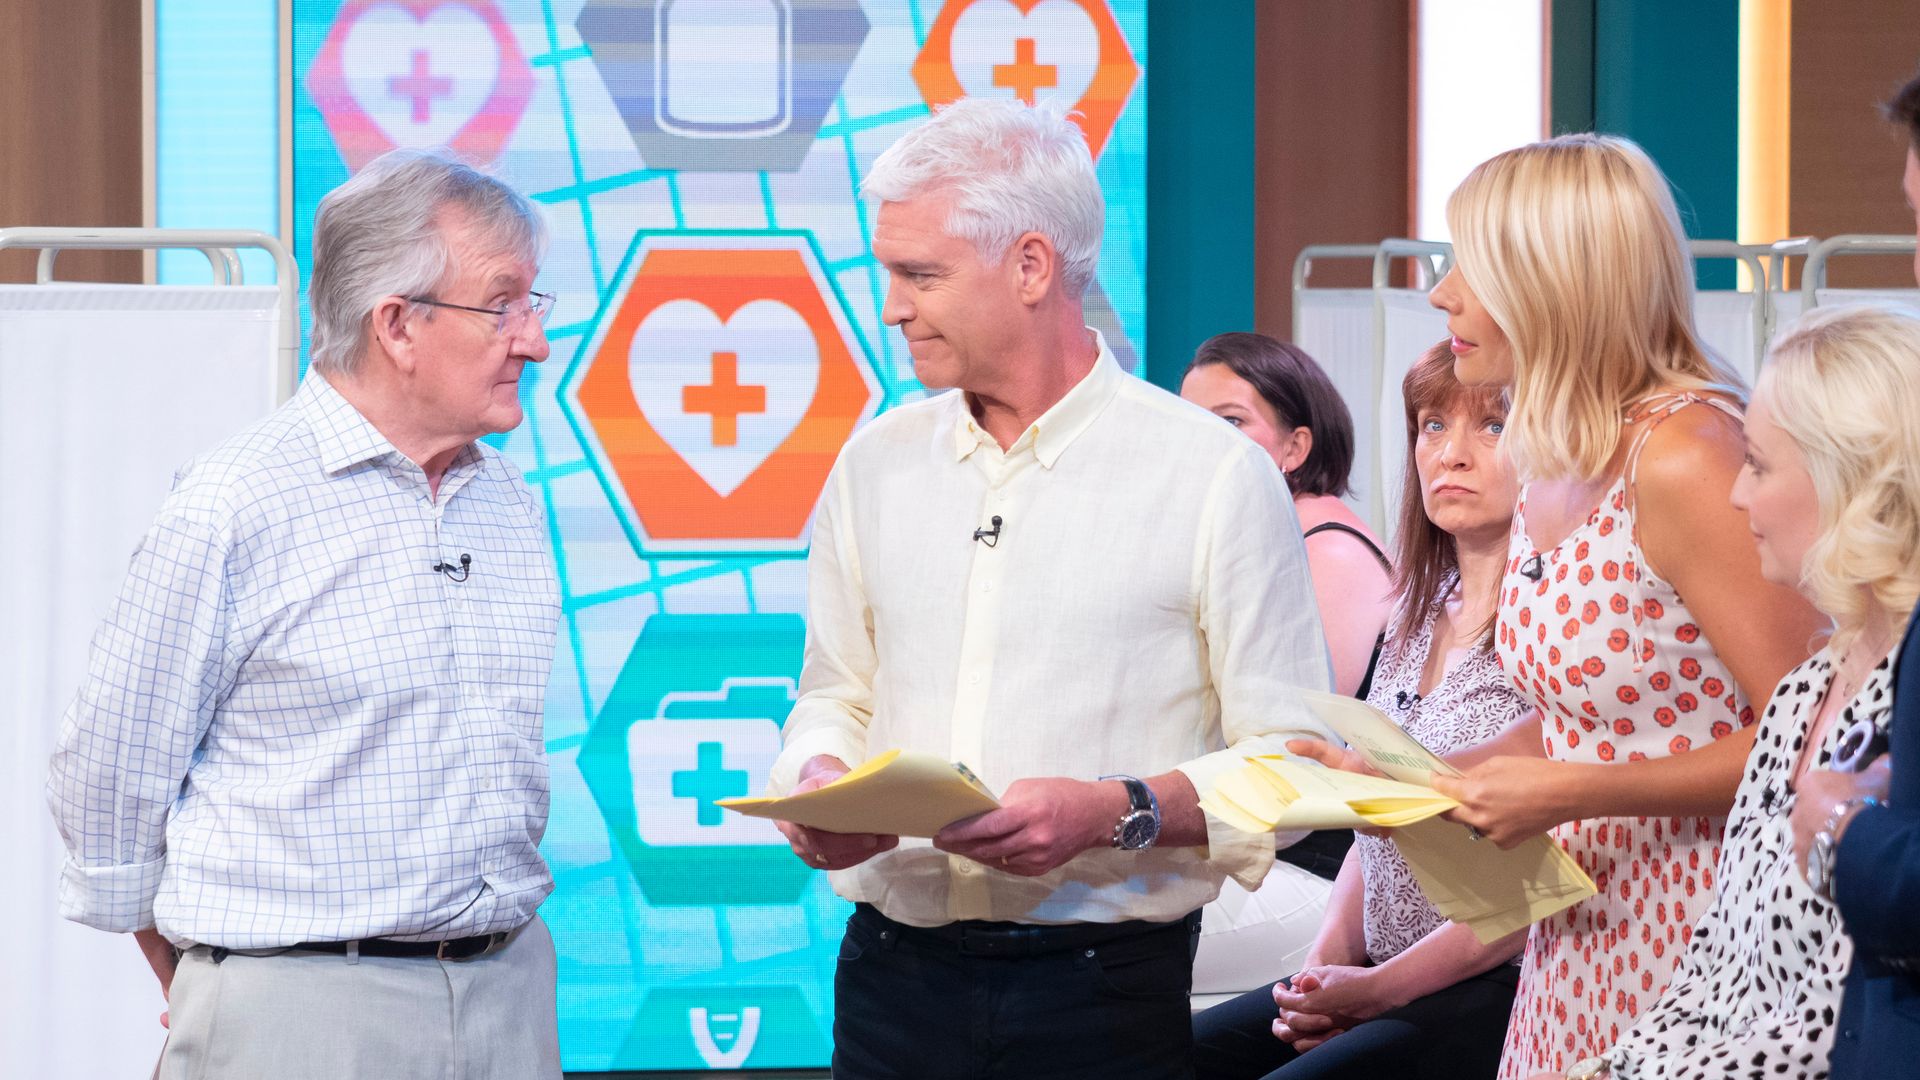 Dr. Chris Steele on This Morning talking to Phillip Schofield and Holly Willoughby